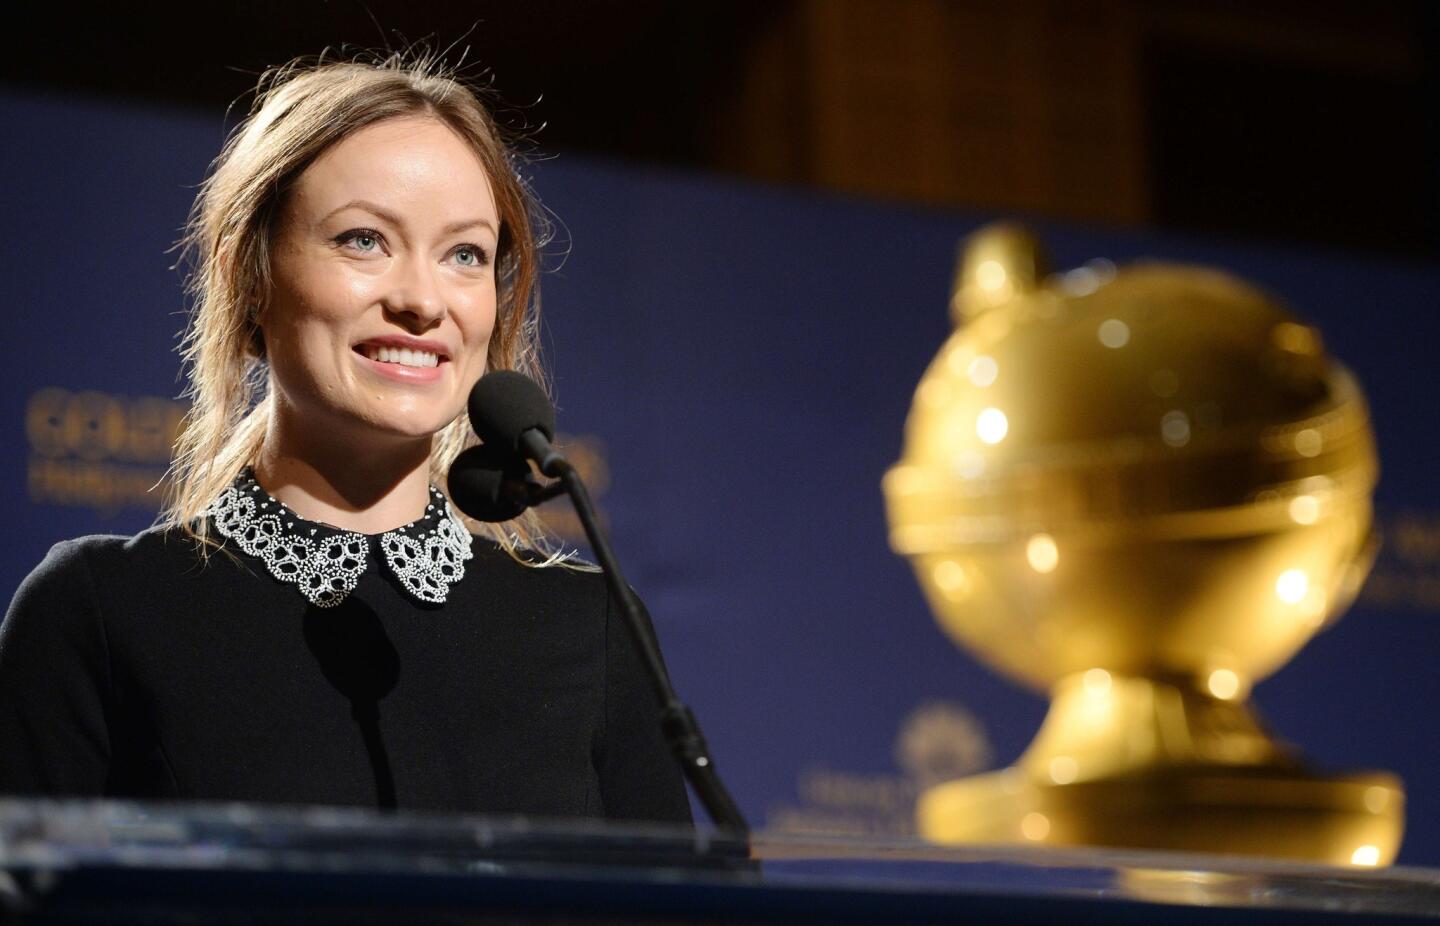 Olivia Wilde shows off baby bump